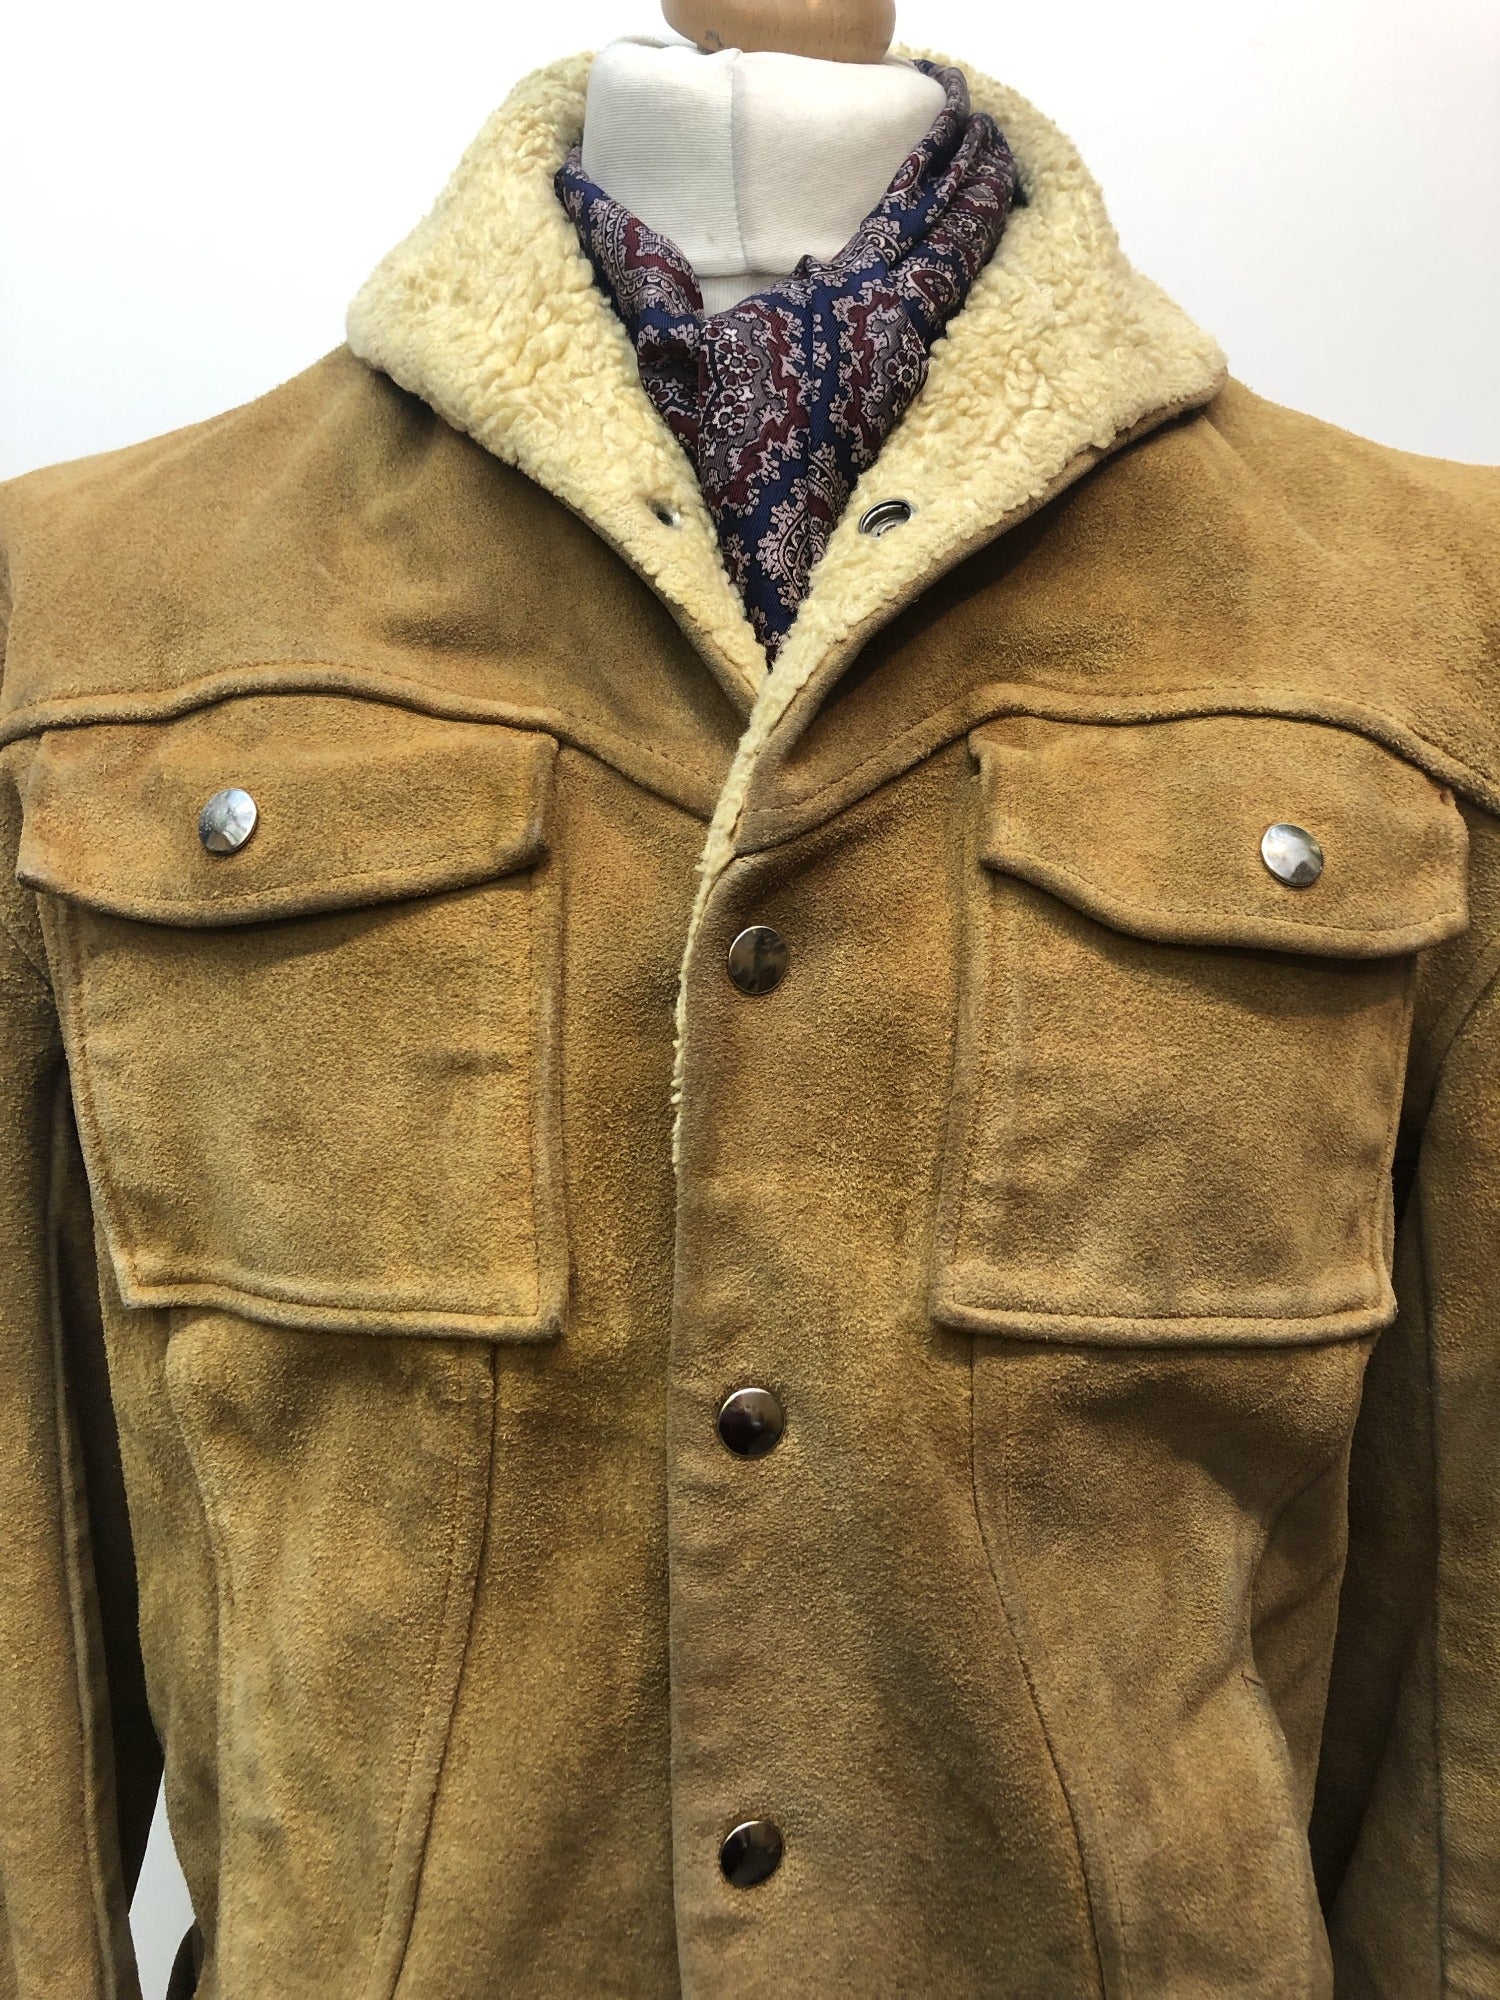 western wear  western  vintage  Urban Village Vintage  urban village  Suede Jacket  Suede  sprung  pockets  mens  M  long sleeves  long sleeve  Jacket  collared  collar  chest pockets  button  60s  1960s